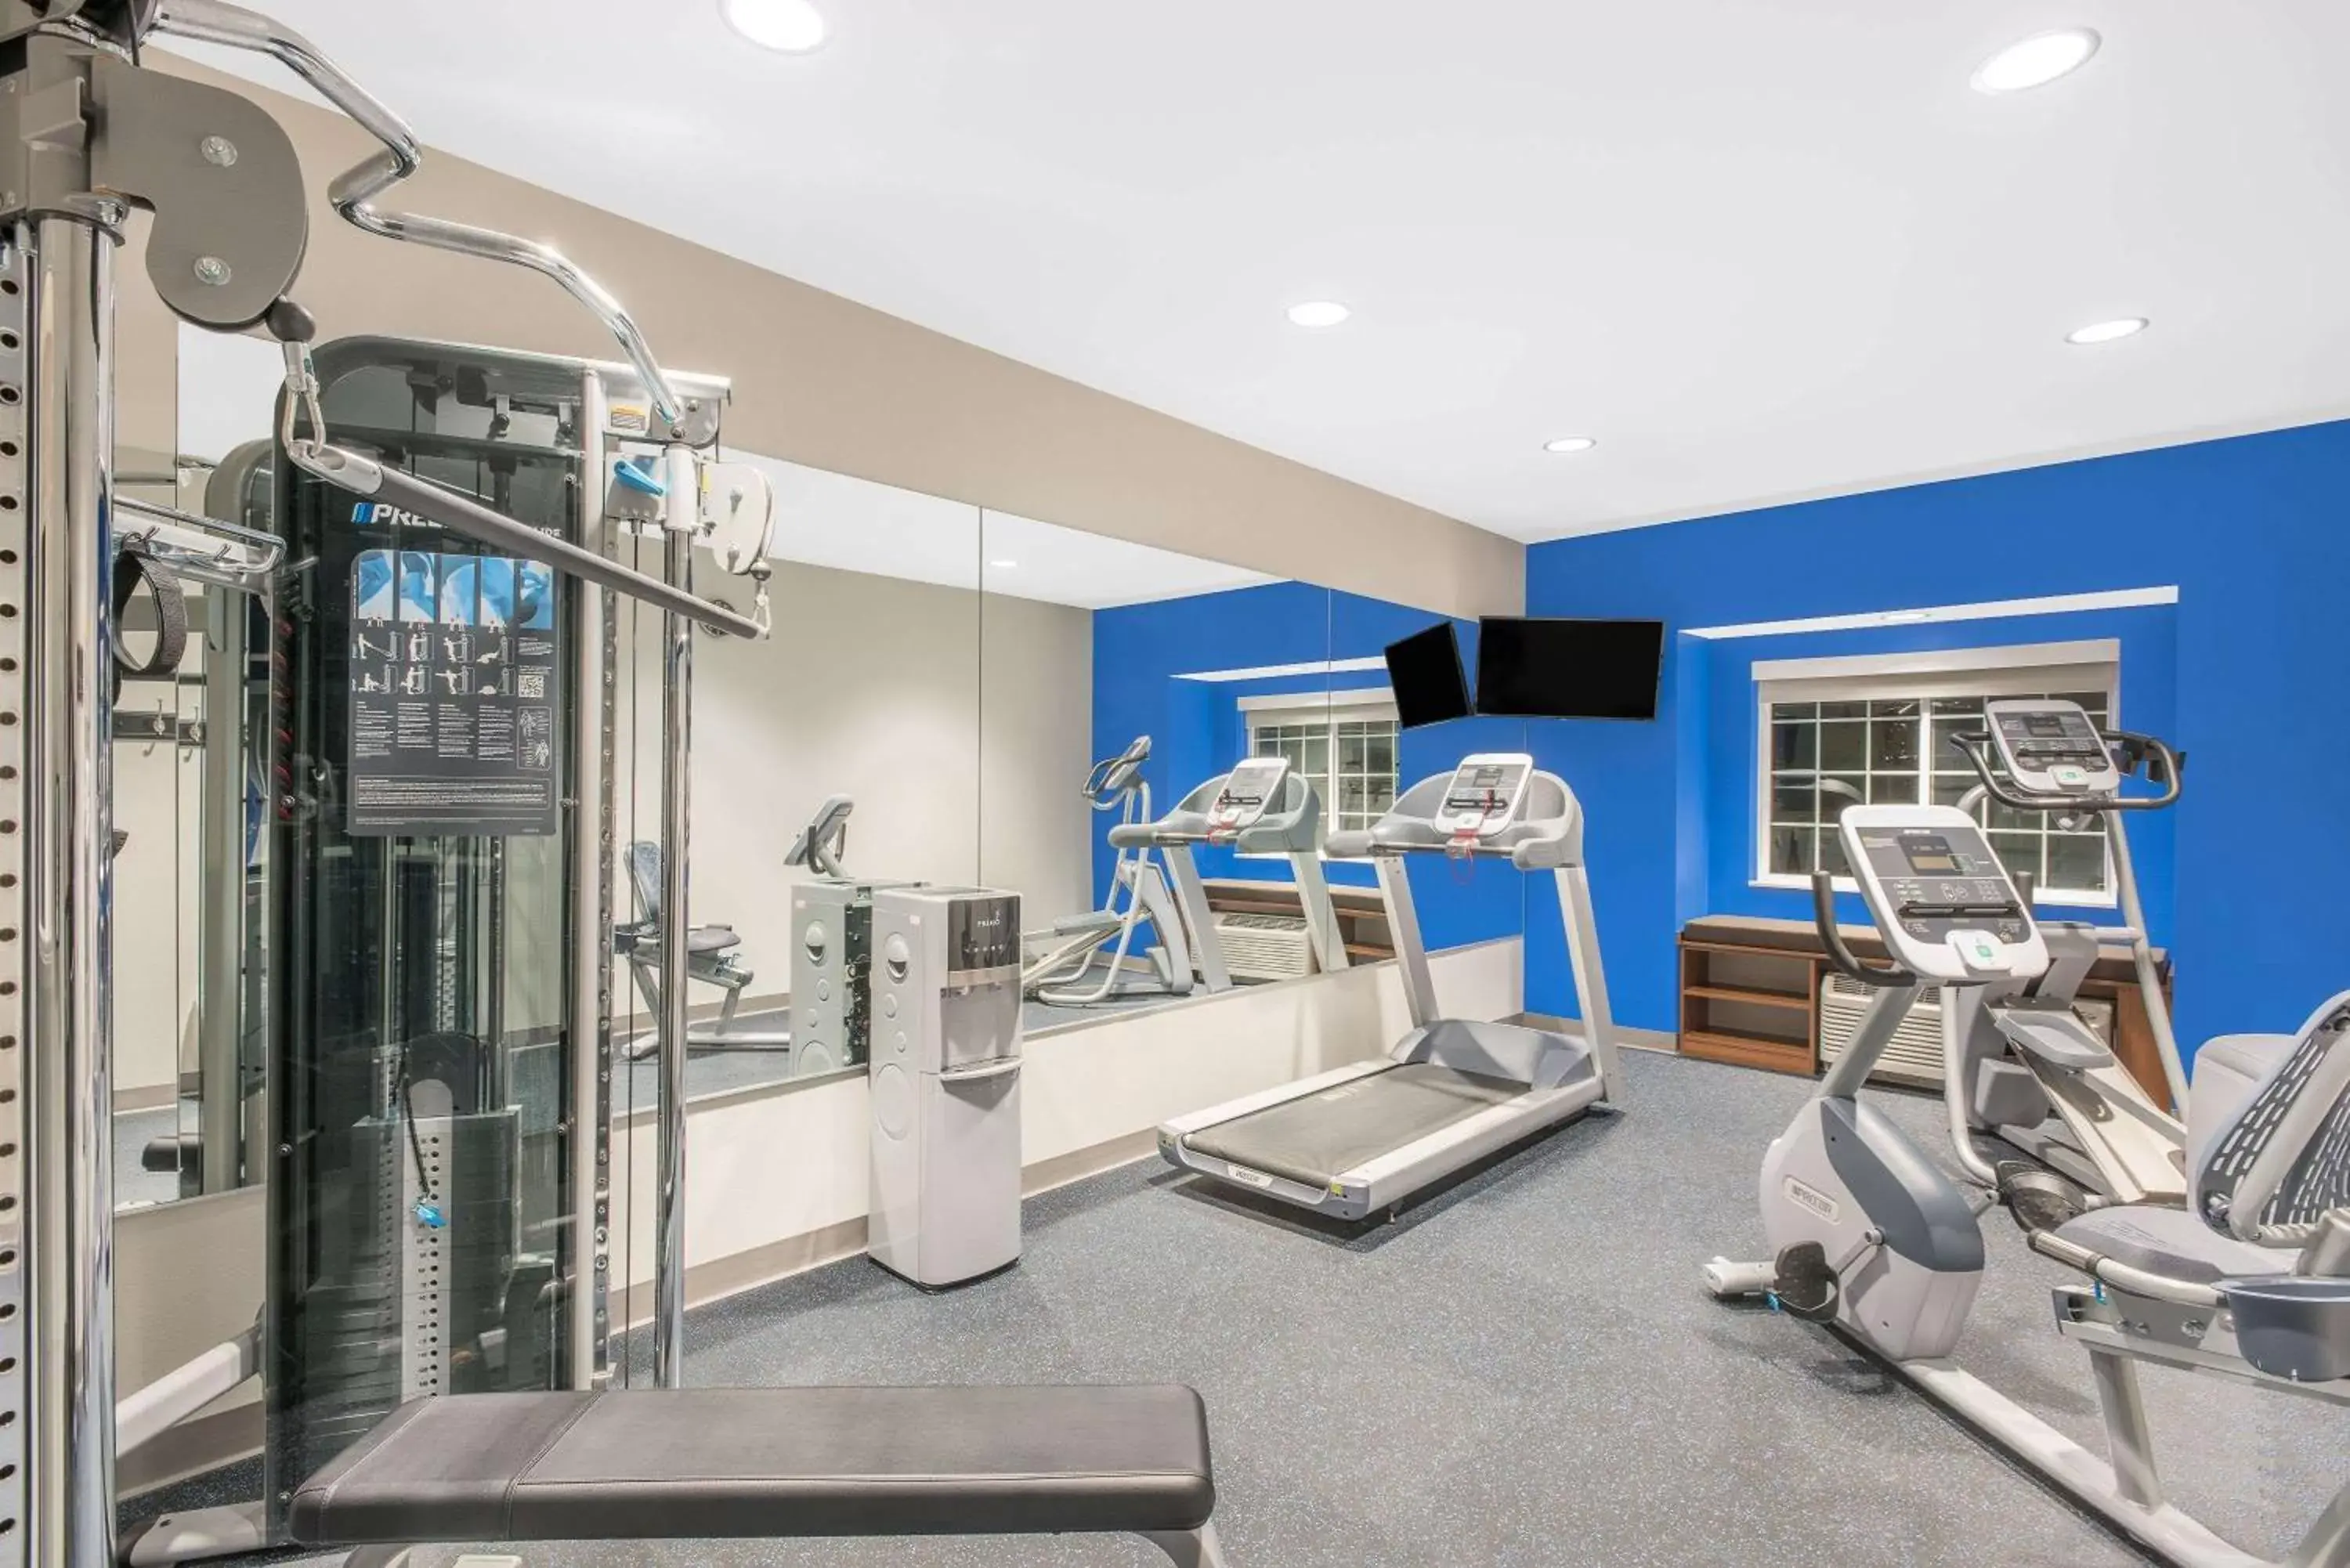 Fitness centre/facilities, Fitness Center/Facilities in Microtel Inn & Suites by Wyndham Binghamton